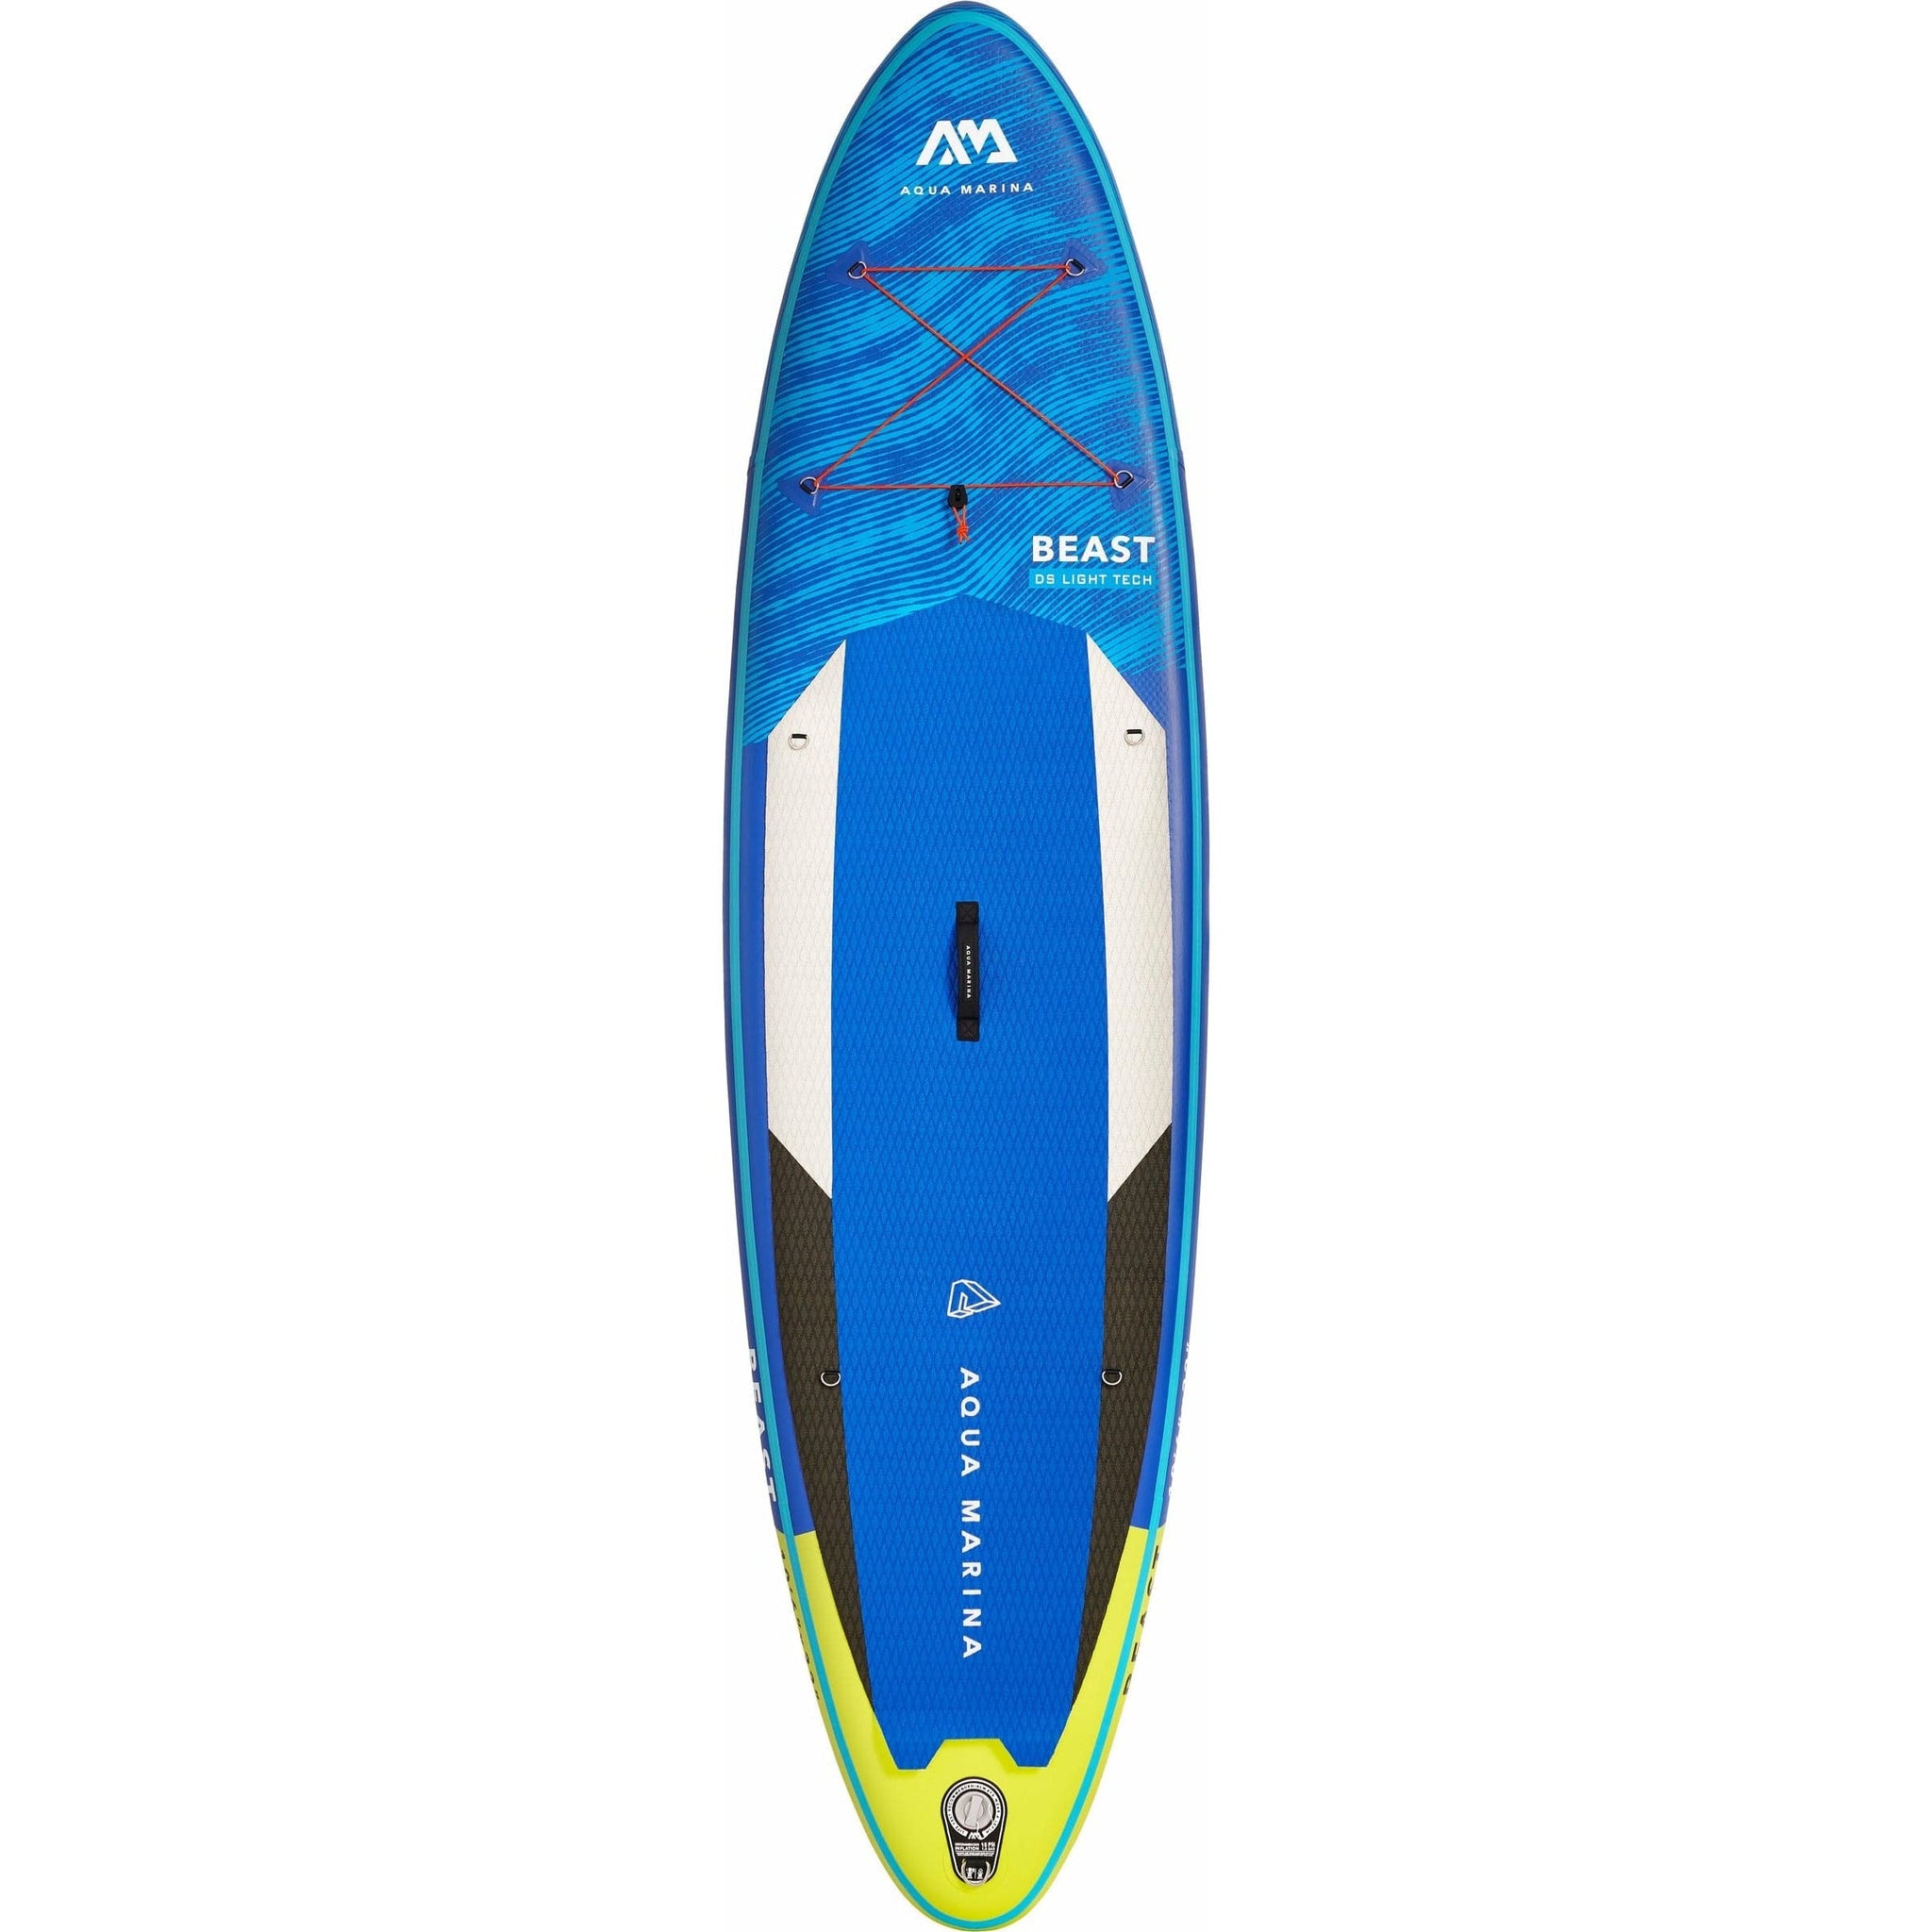 – Outdoors Fun Up - Marina Stand Inflatable SUP Board - Packa Paddle BEAST 10\'6\